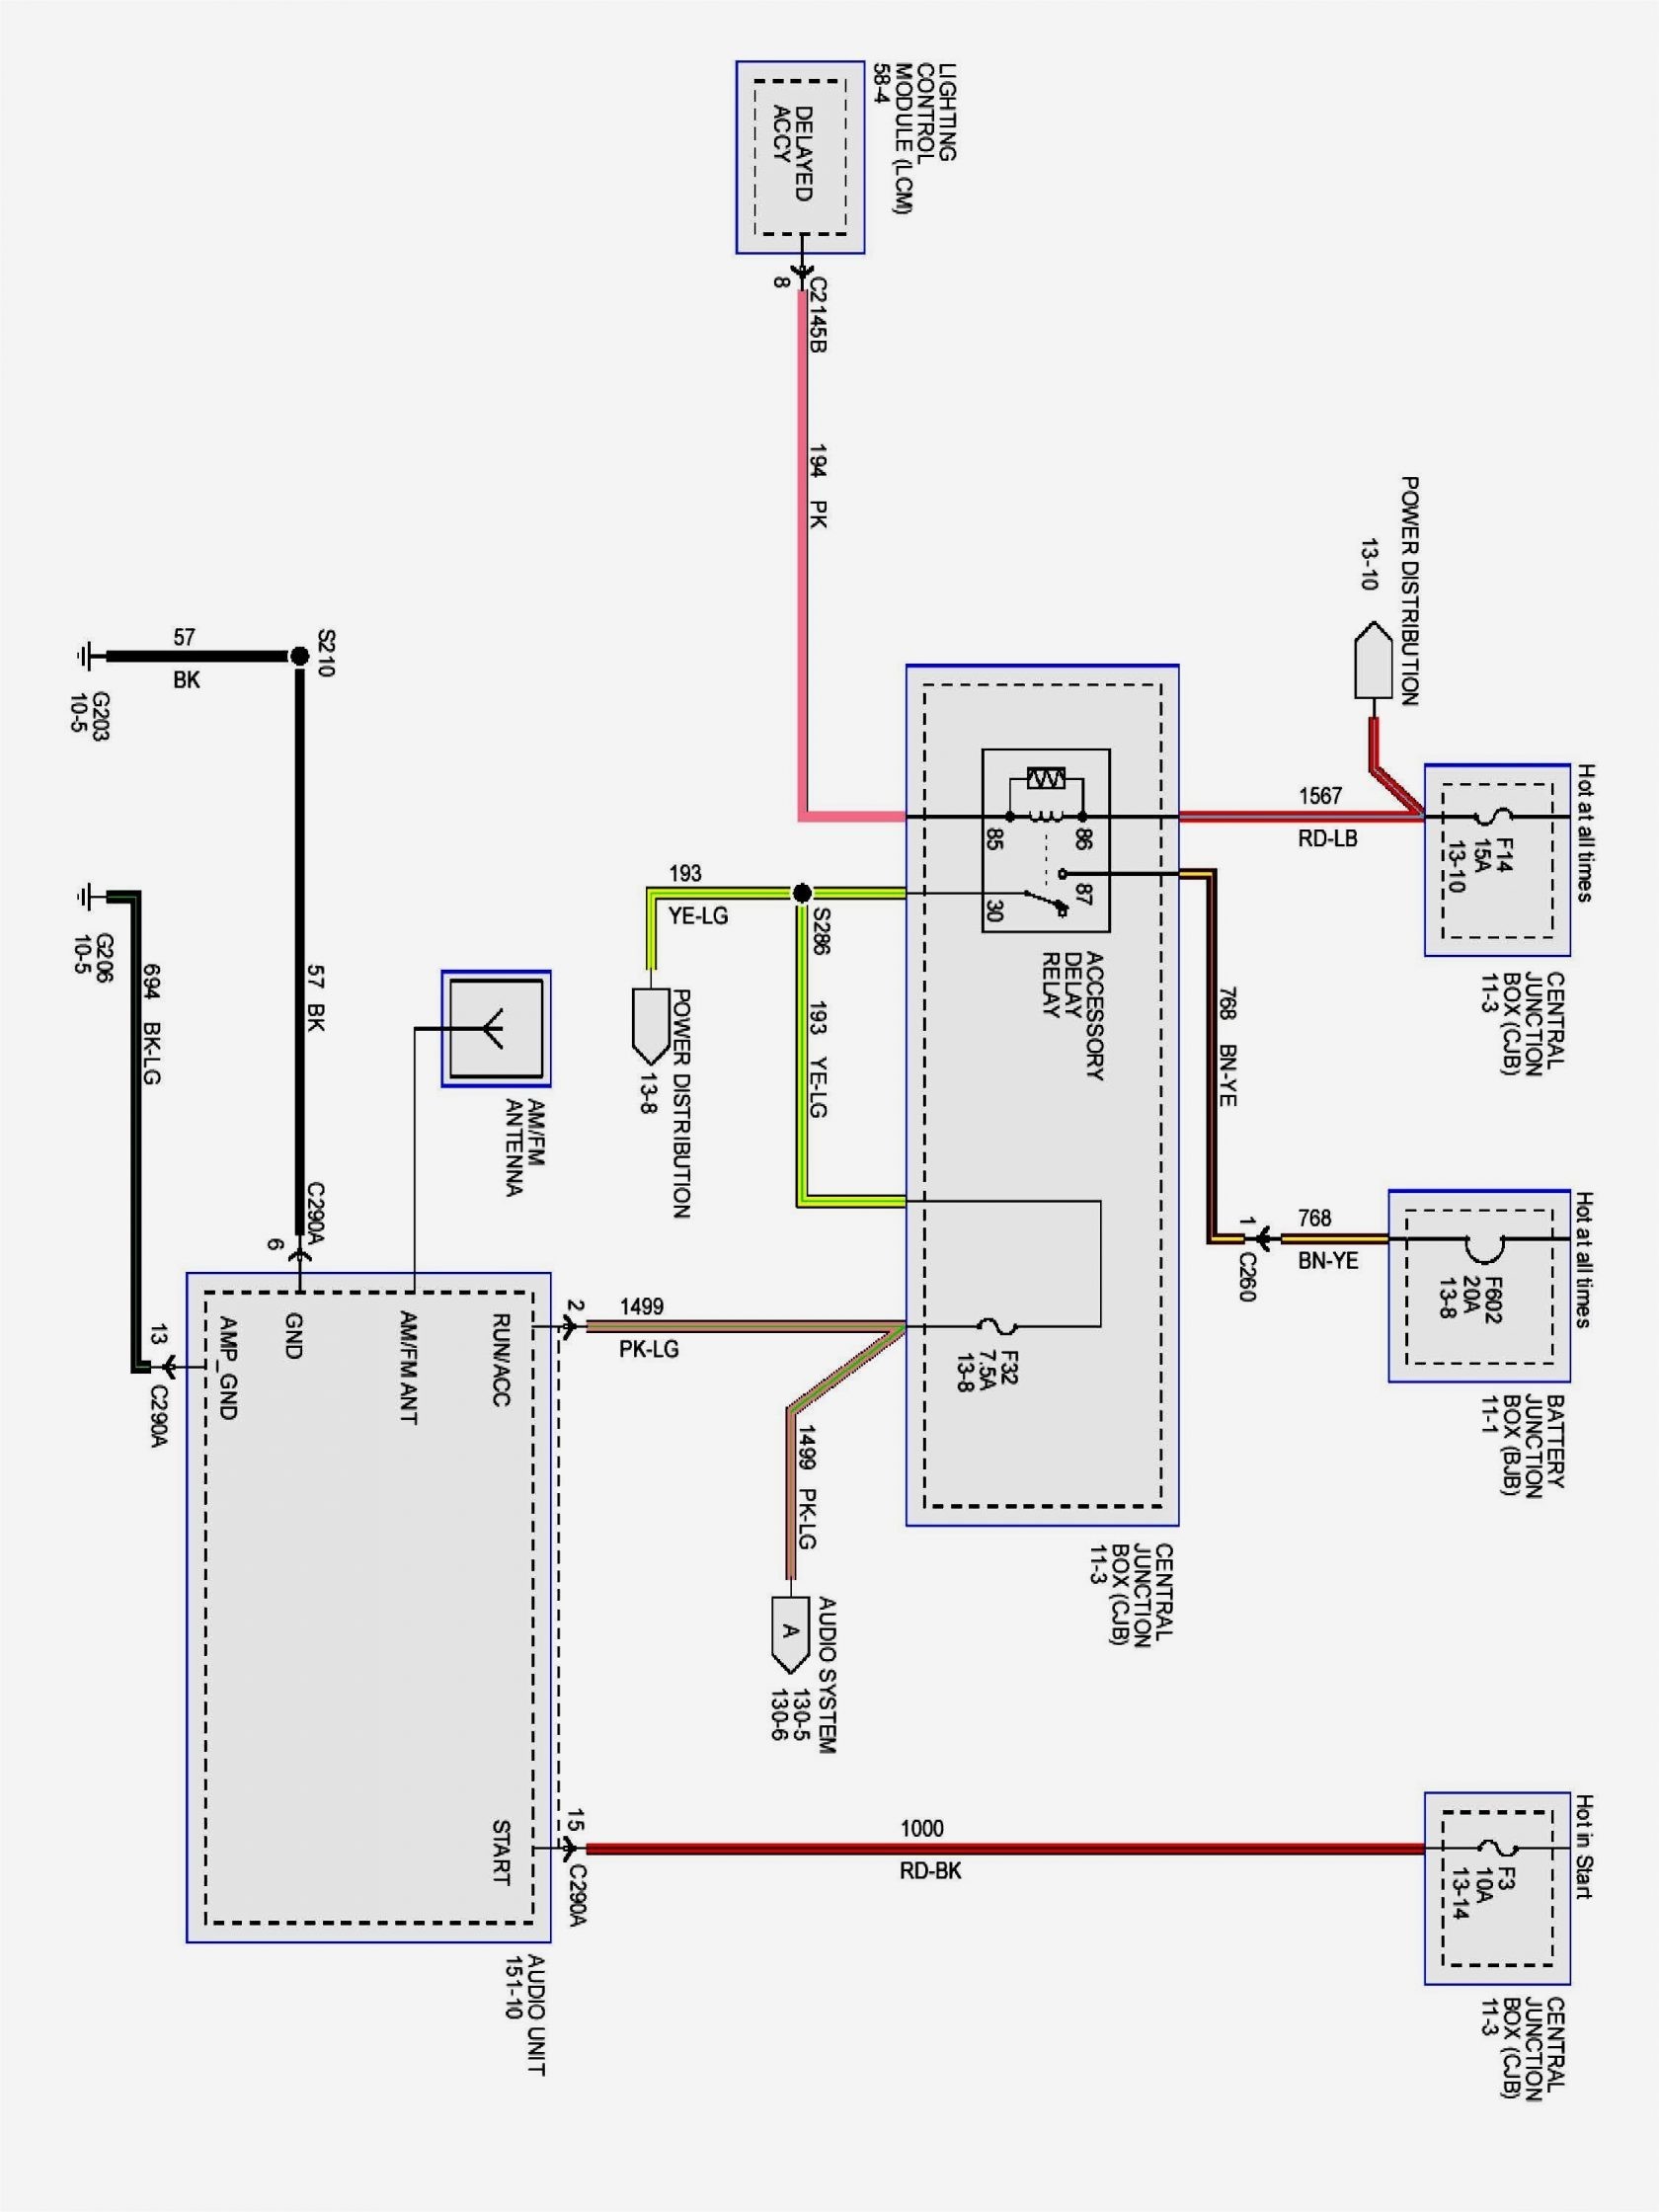 Goodman Furnace Parts Diagram Wiring Diagram for Nest Learning thermostat Inspirationa Goodman Of Goodman Furnace Parts Diagram